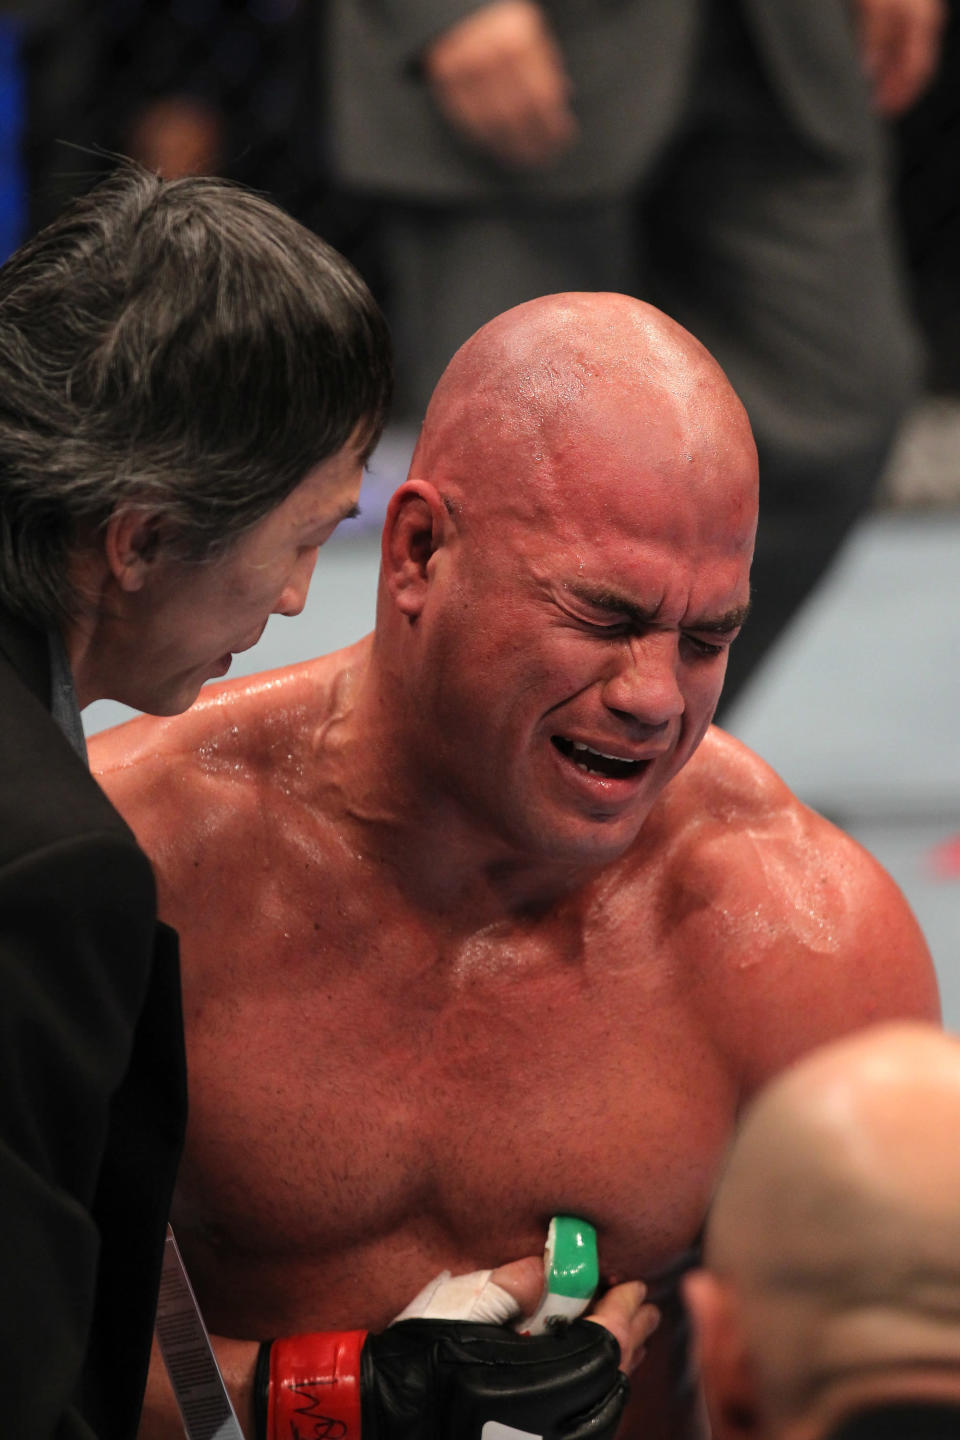 Tito Ortiz exhibits the pain of a blow to the ribs after his TKO loss to Antonio Rogerio Nogueira during the UFC 140 event at Air Canada Centre on December 10, 2011 in Toronto, Ontario, Canada. (Photo by Nick Laham/Zuffa LLC/Zuffa LLC via Getty Images)